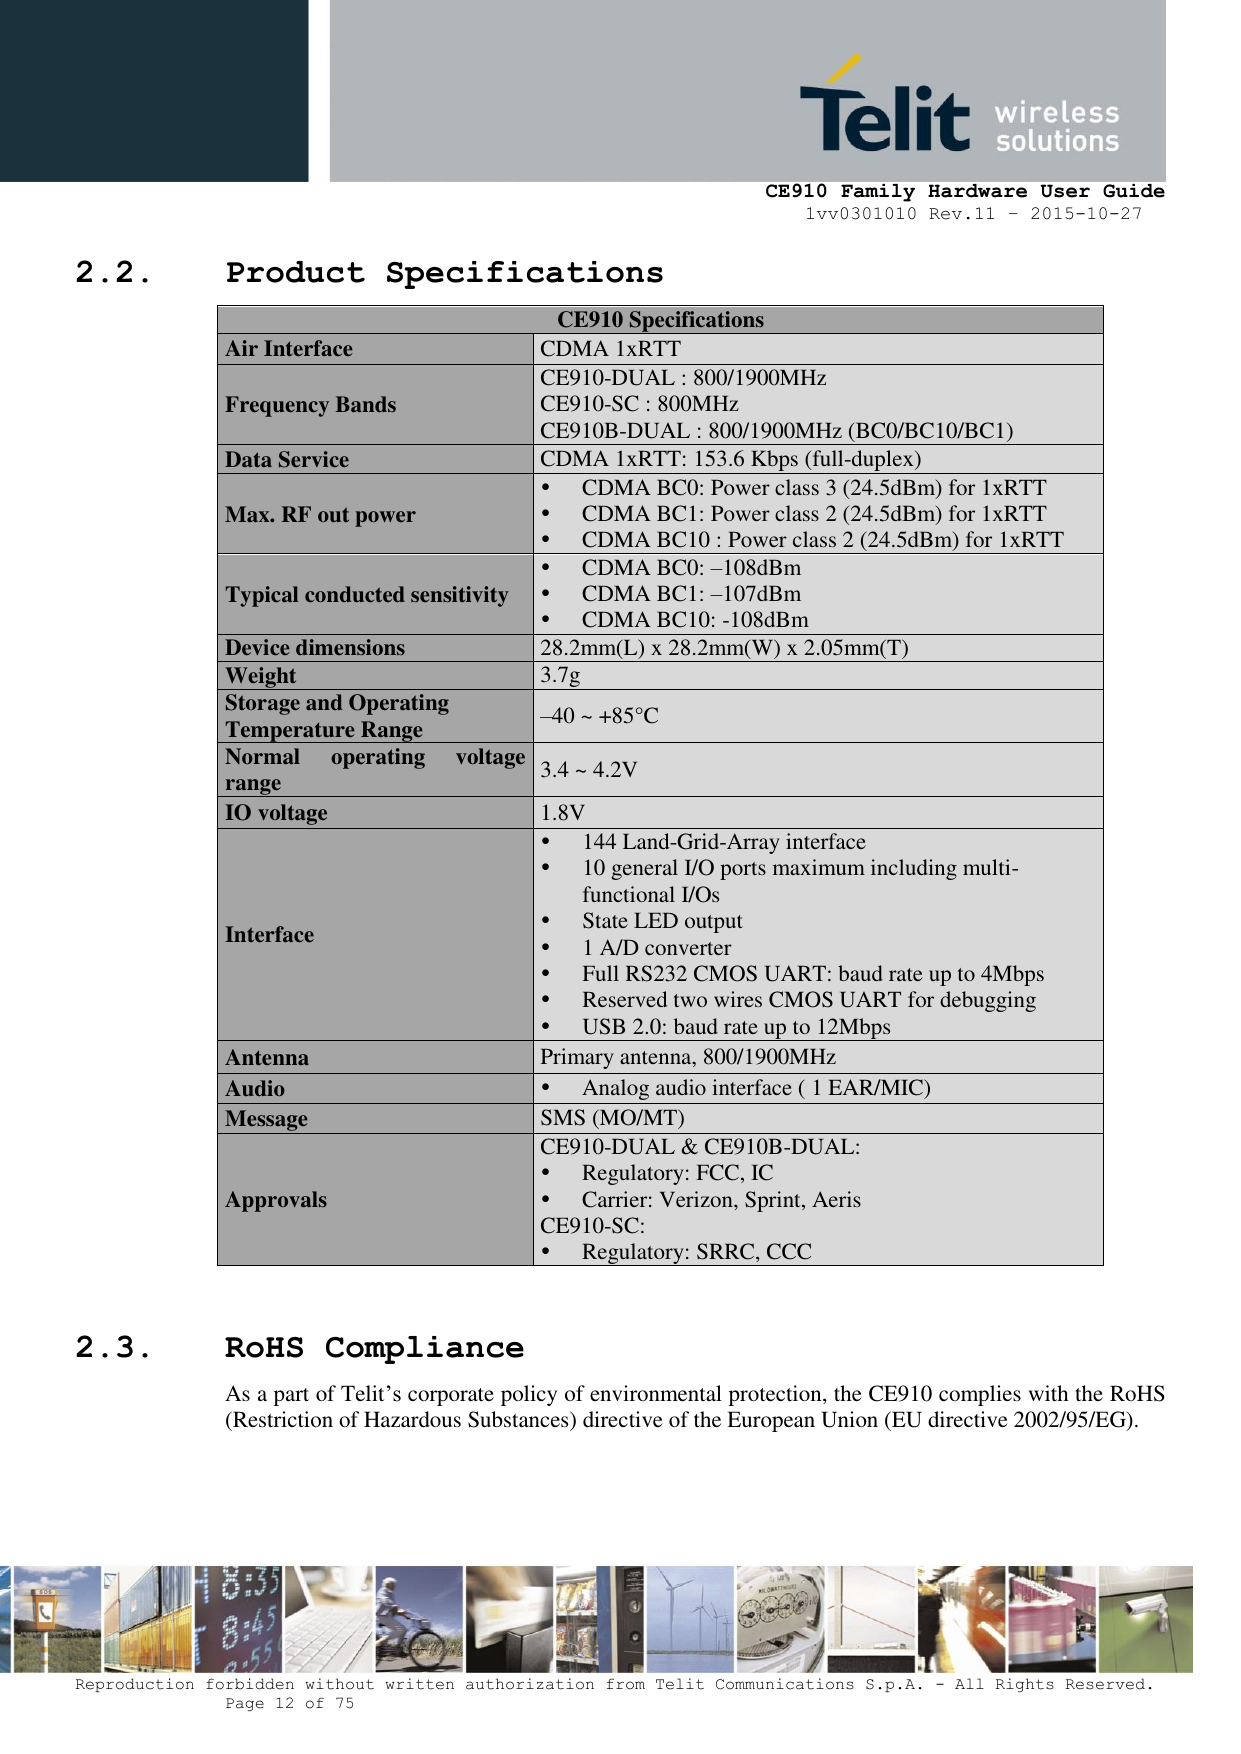     CE910 Family Hardware User Guide 1vv0301010 Rev.11 – 2015-10-27 Reproduction forbidden without written authorization from Telit Communications S.p.A. - All Rights Reserved.    Page 12 of 75                                                     2.2. Product Specifications  CE910 Specifications Air Interface CDMA 1xRTT Frequency Bands CE910-DUAL : 800/1900MHz CE910-SC : 800MHz CE910B-DUAL : 800/1900MHz (BC0/BC10/BC1) Data Service CDMA 1xRTT: 153.6 Kbps (full-duplex) Max. RF out power  CDMA BC0: Power class 3 (24.5dBm) for 1xRTT  CDMA BC1: Power class 2 (24.5dBm) for 1xRTT  CDMA BC10 : Power class 2 (24.5dBm) for 1xRTT Typical conducted sensitivity  CDMA BC0: –108dBm  CDMA BC1: –107dBm   CDMA BC10: -108dBm Device dimensions  28.2mm(L) x 28.2mm(W) x 2.05mm(T) Weight 3.7g Storage and Operating  Temperature Range –40 ~ +85°C Normal  operating  voltage range 3.4 ~ 4.2V IO voltage 1.8V Interface  144 Land-Grid-Array interface  10 general I/O ports maximum including multi-functional I/Os  State LED output  1 A/D converter   Full RS232 CMOS UART: baud rate up to 4Mbps  Reserved two wires CMOS UART for debugging  USB 2.0: baud rate up to 12Mbps Antenna Primary antenna, 800/1900MHz Audio  Analog audio interface ( 1 EAR/MIC) Message SMS (MO/MT) Approvals CE910-DUAL &amp; CE910B-DUAL:  Regulatory: FCC, IC  Carrier: Verizon, Sprint, Aeris CE910-SC:  Regulatory: SRRC, CCC  2.3. RoHS Compliance As a part of Telit’s corporate policy of environmental protection, the CE910 complies with the RoHS (Restriction of Hazardous Substances) directive of the European Union (EU directive 2002/95/EG).  